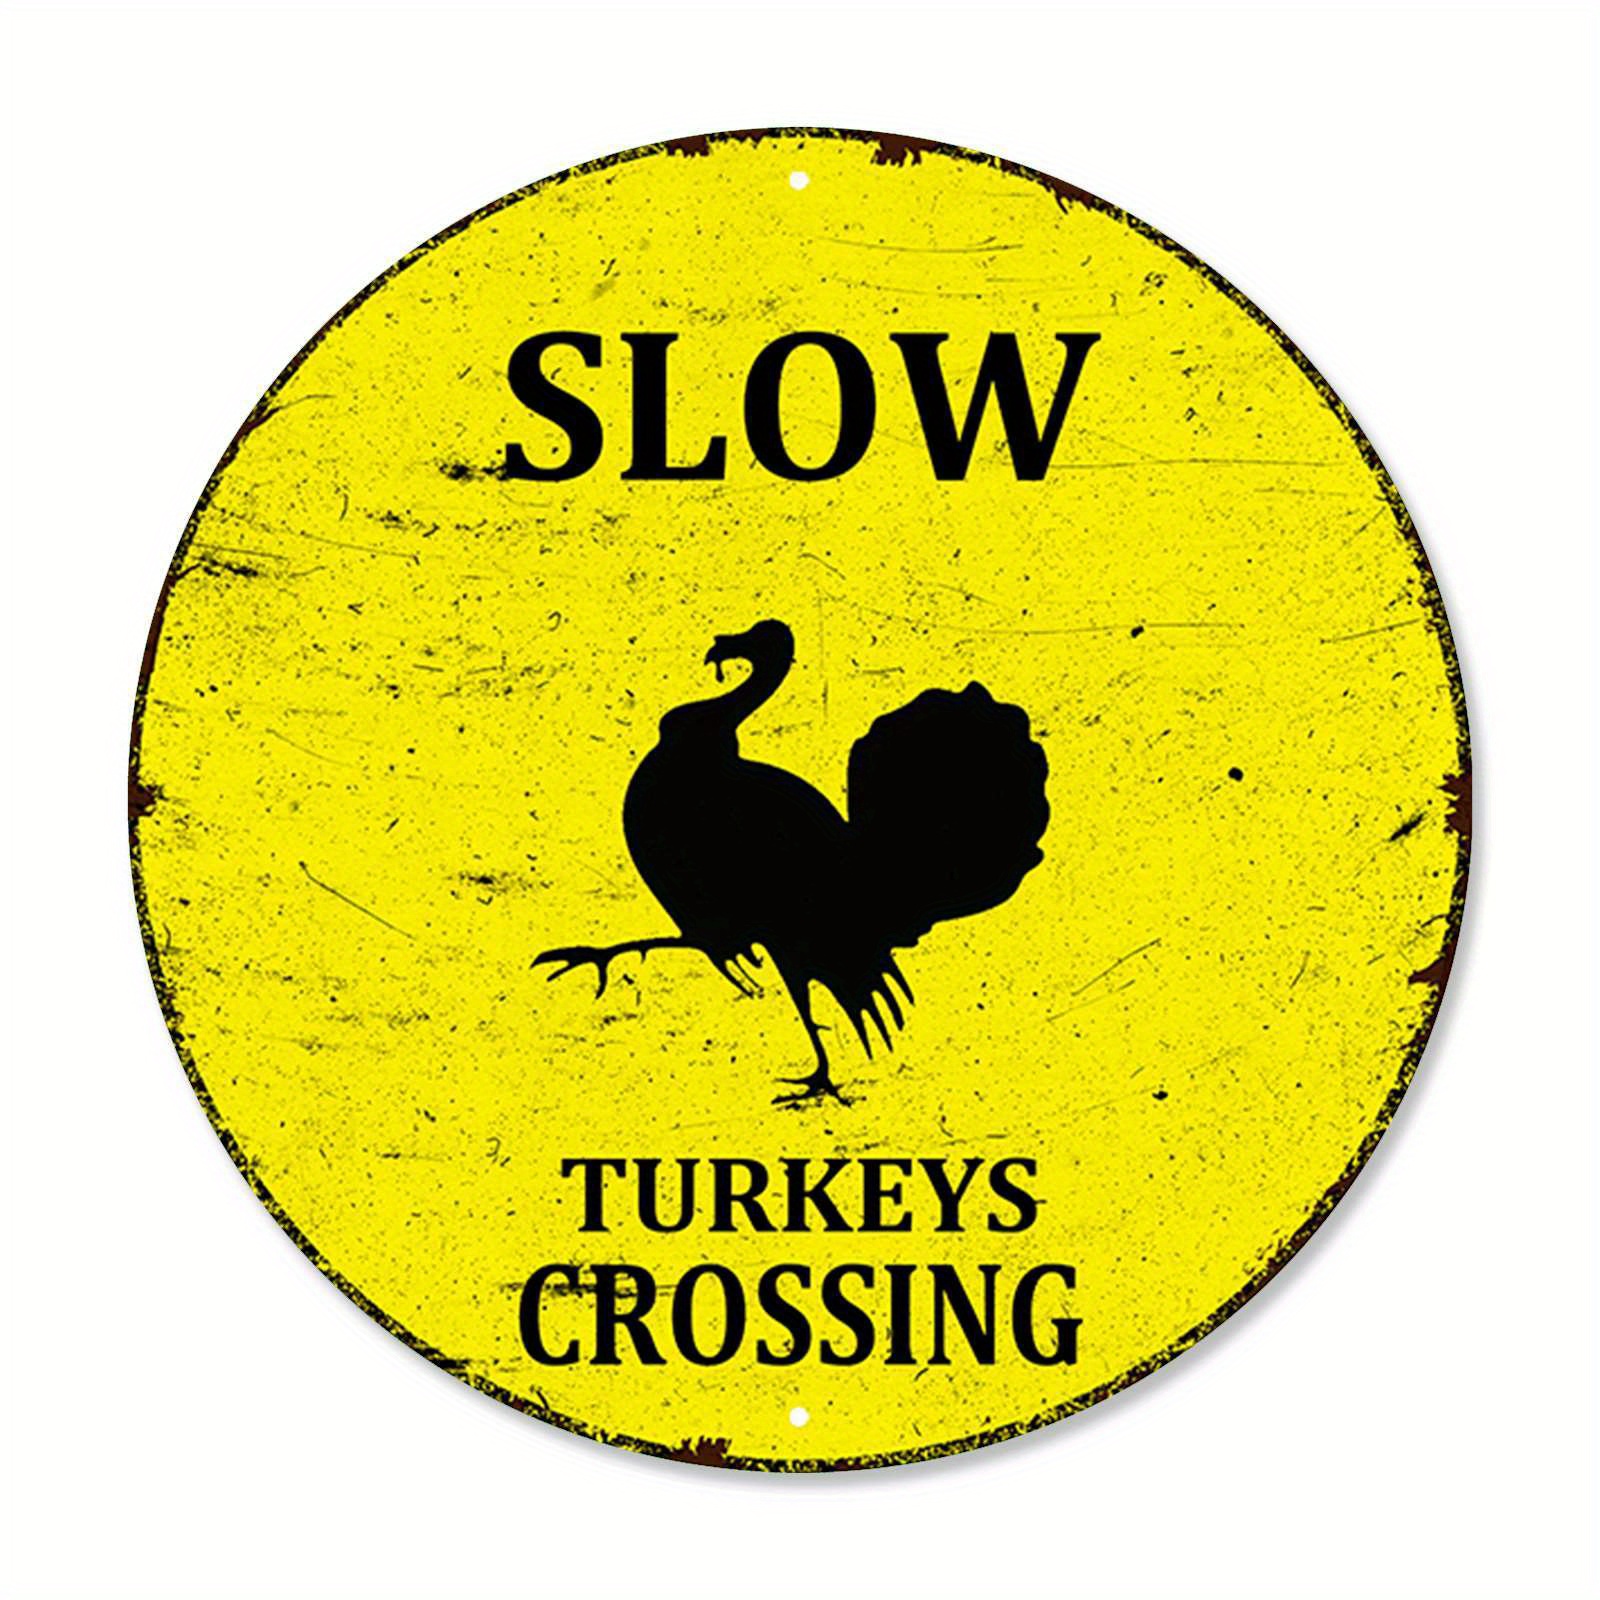 

1pc 8x8 Inch (20x20cm) Round Aluminum Sign Slow Down Turkeys Crossing Caution Animal Farm Ranch Funny Farm Country Yard Sign Novelty Road Wall Décor